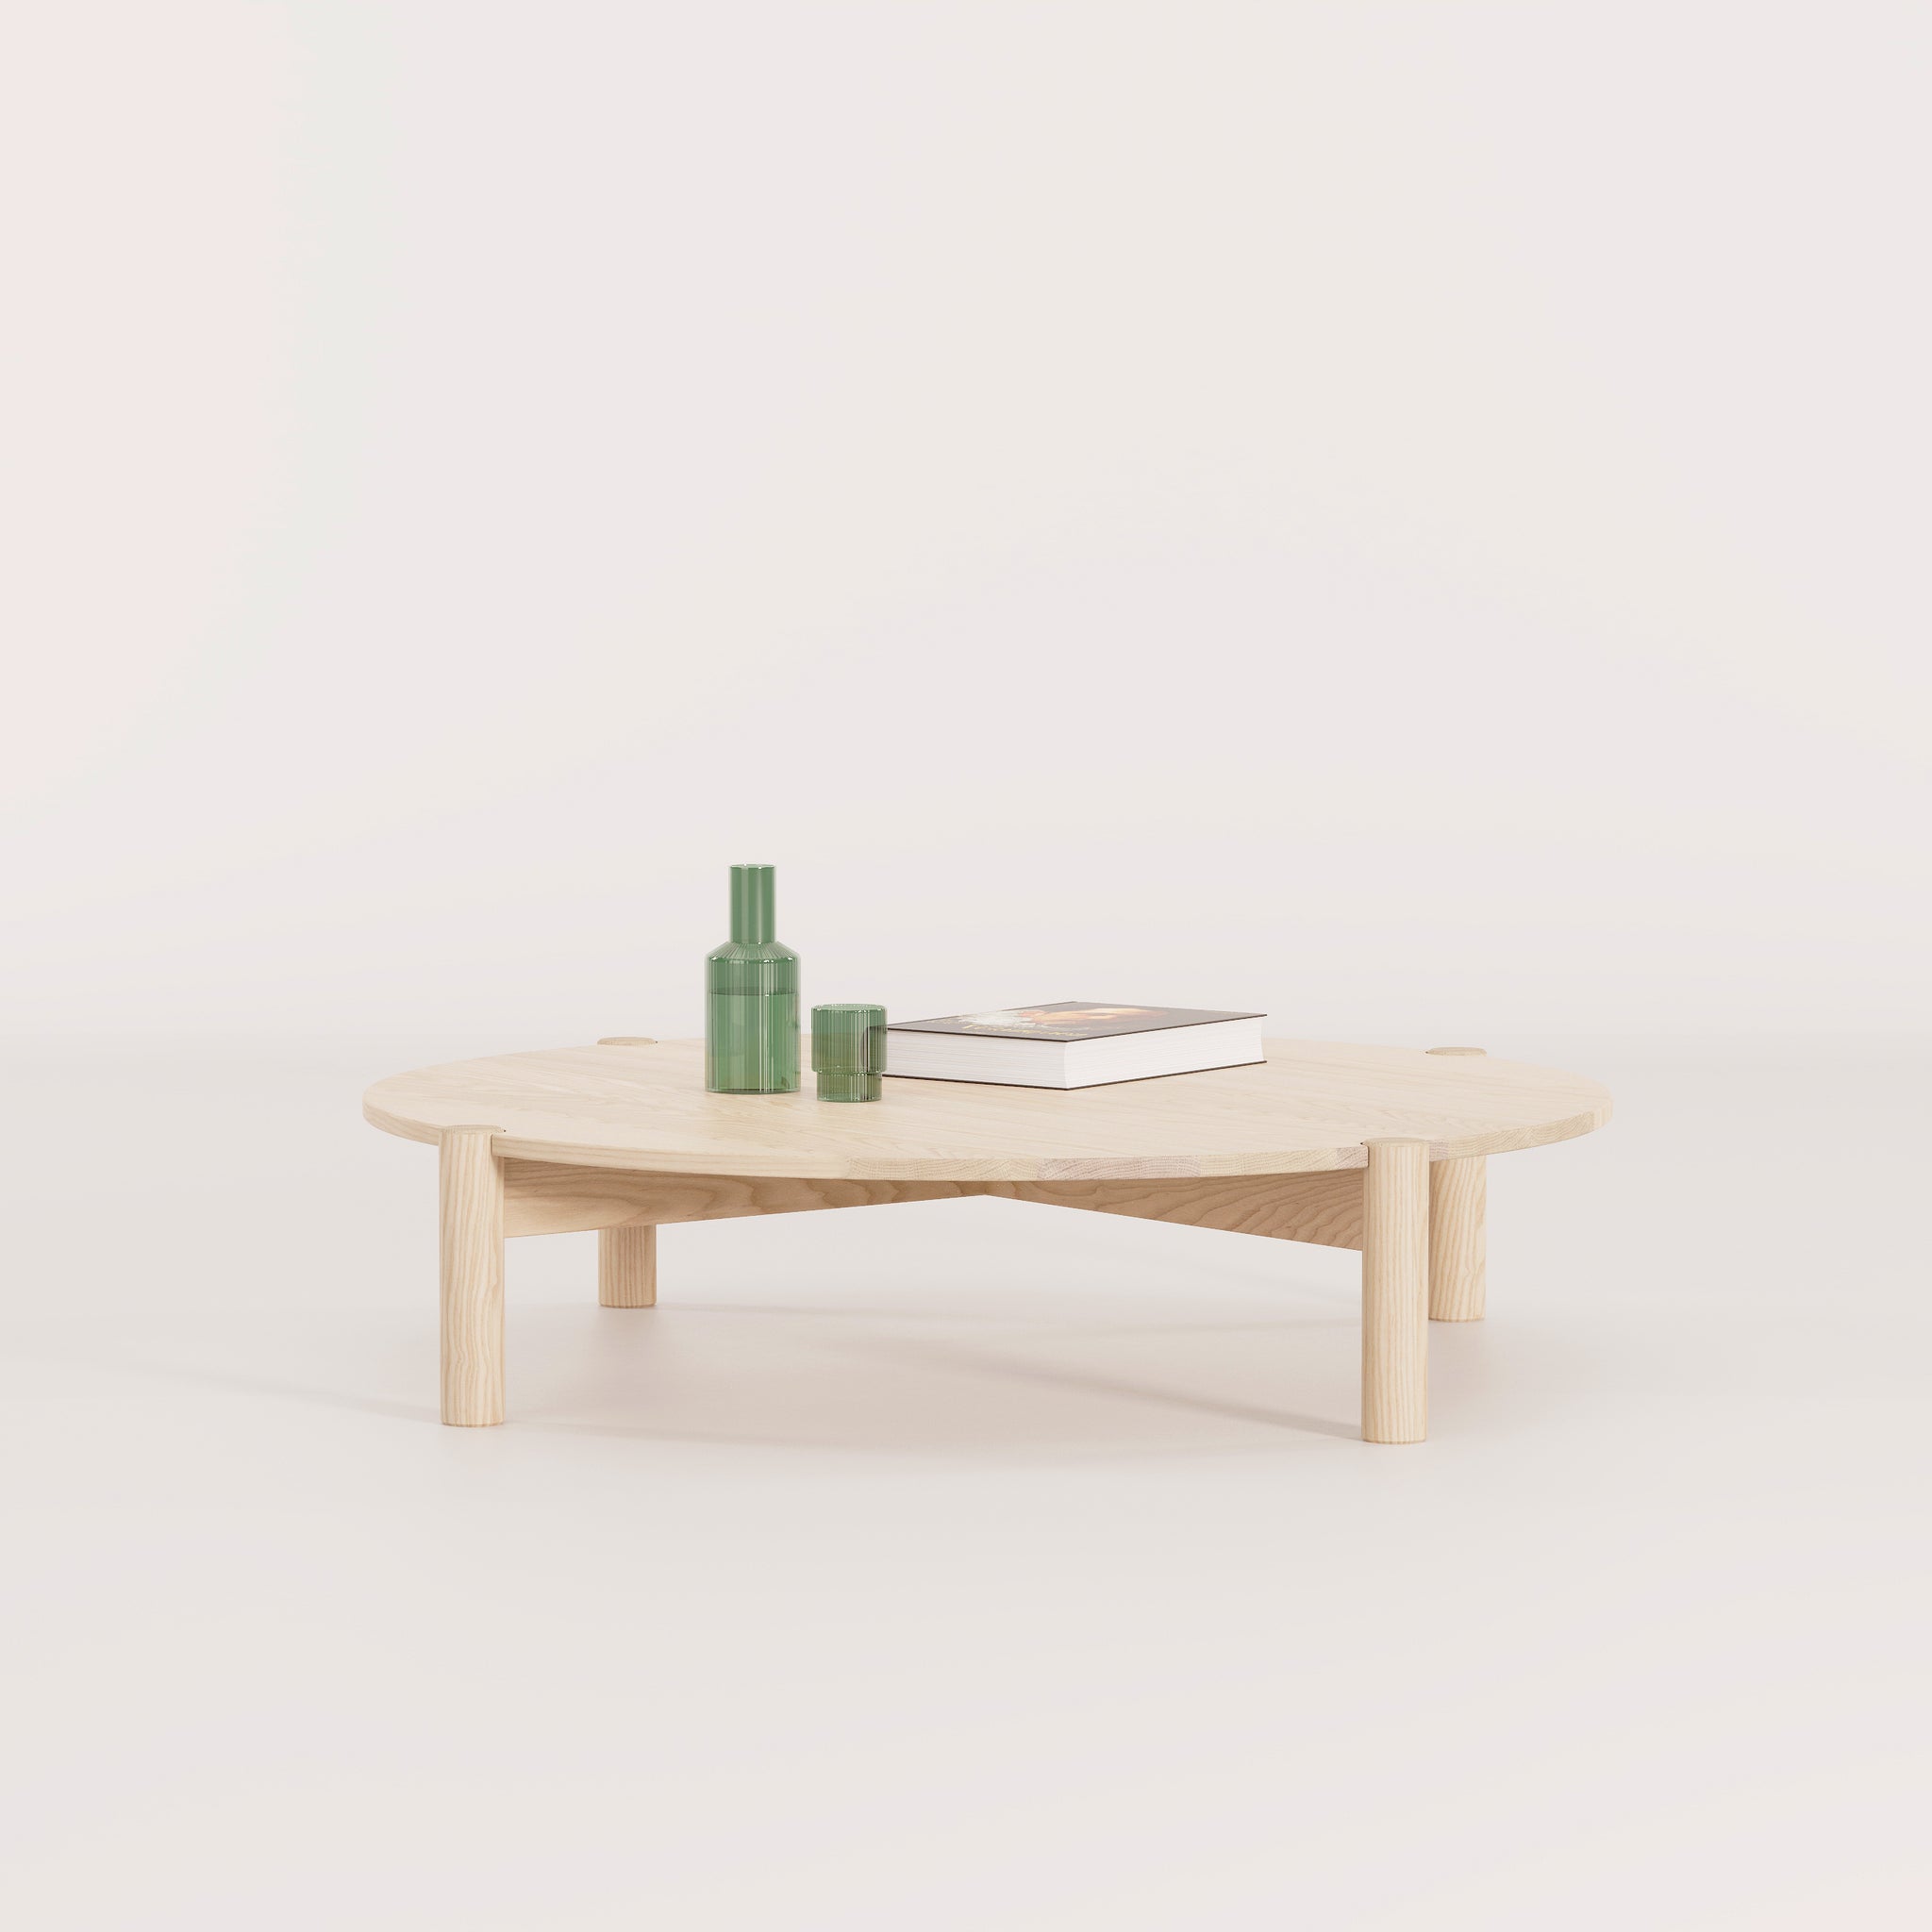 A modern, Australian made, coffee table by Mast Furniture.